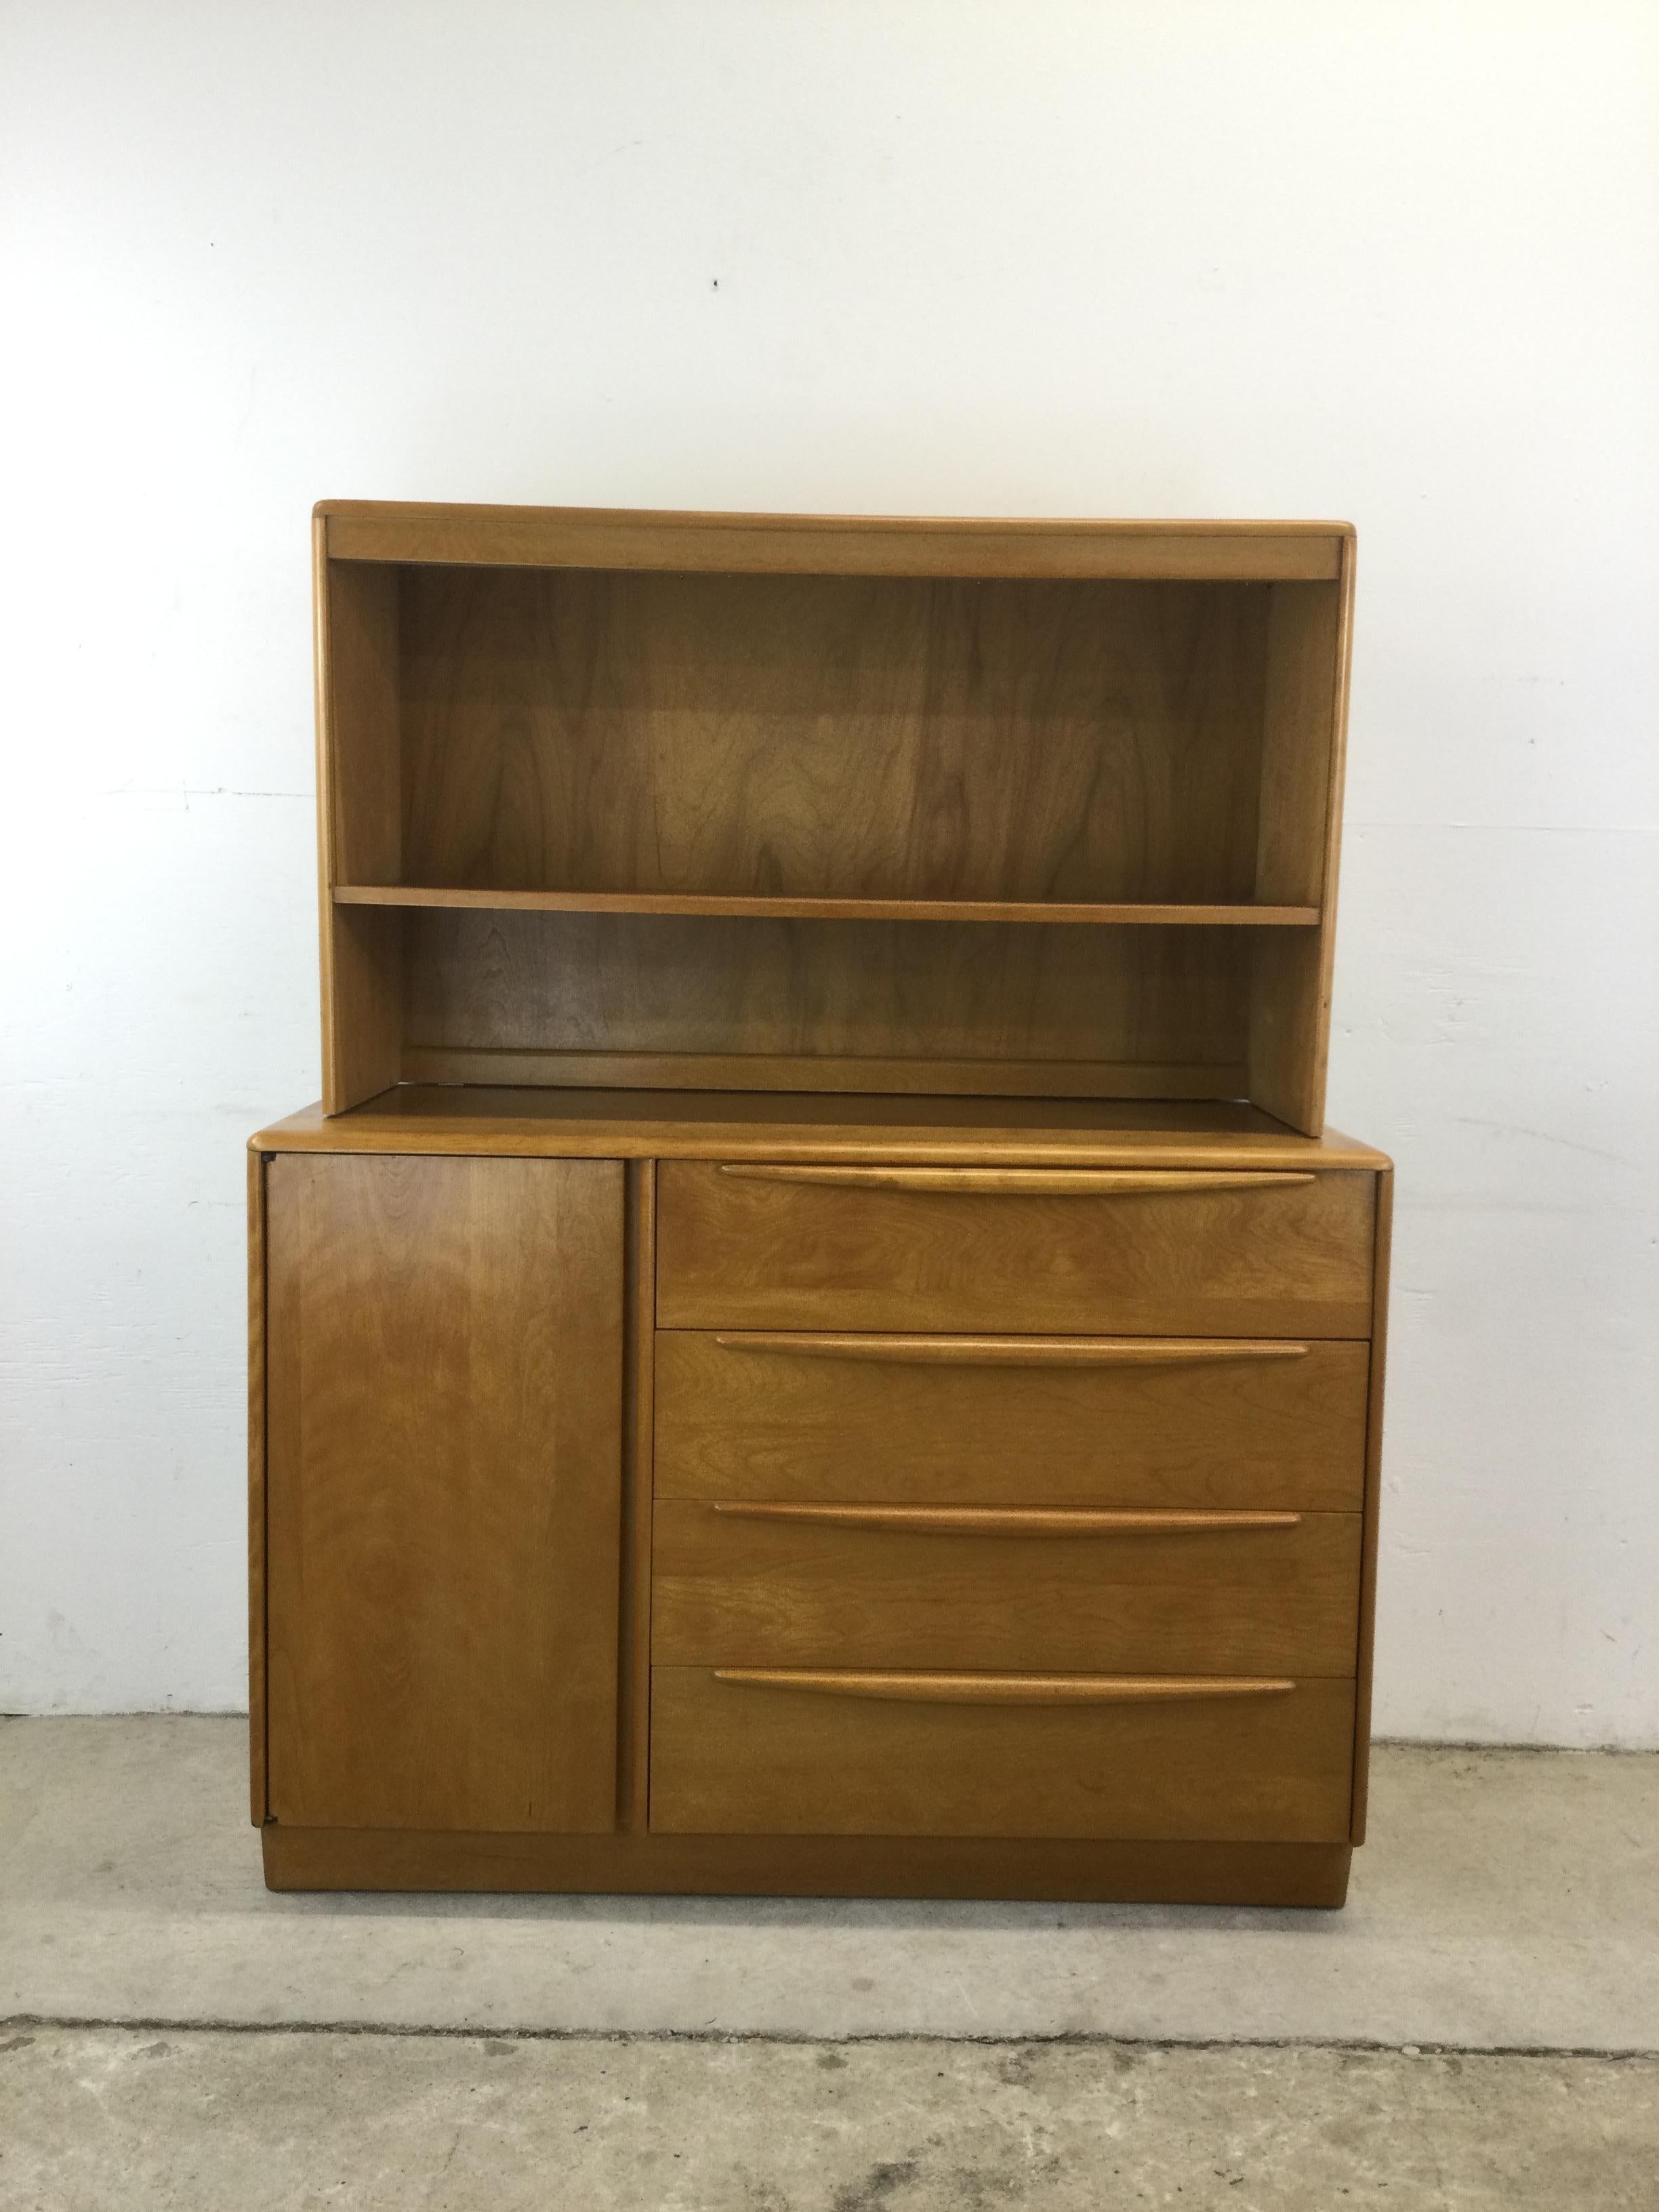 This mid century modern china cabinet by Heywood Wakefield features hardwood construction, original Wheat finish, two piece construction with removable top cabinet.  Sliding glass doors and adjustable shelves in the upper cabinet.  Four drawers, one